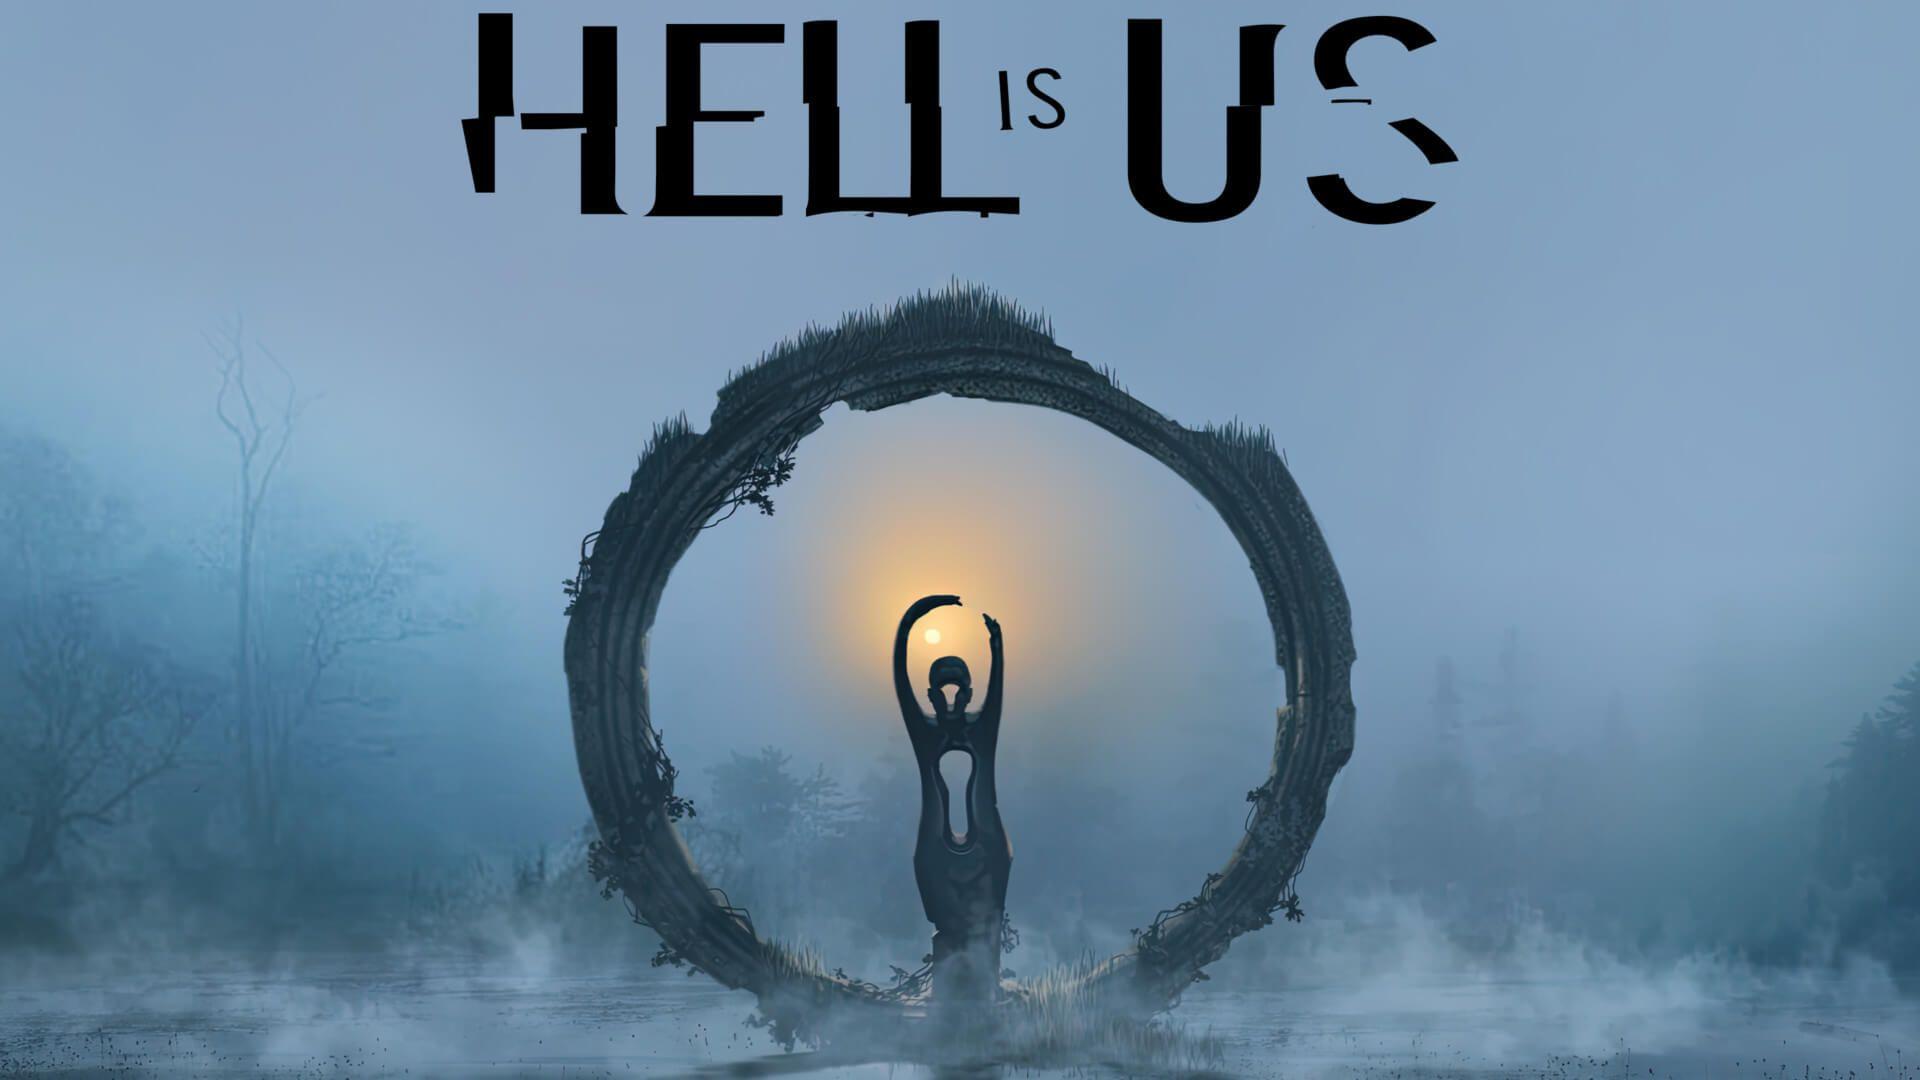 hell is us